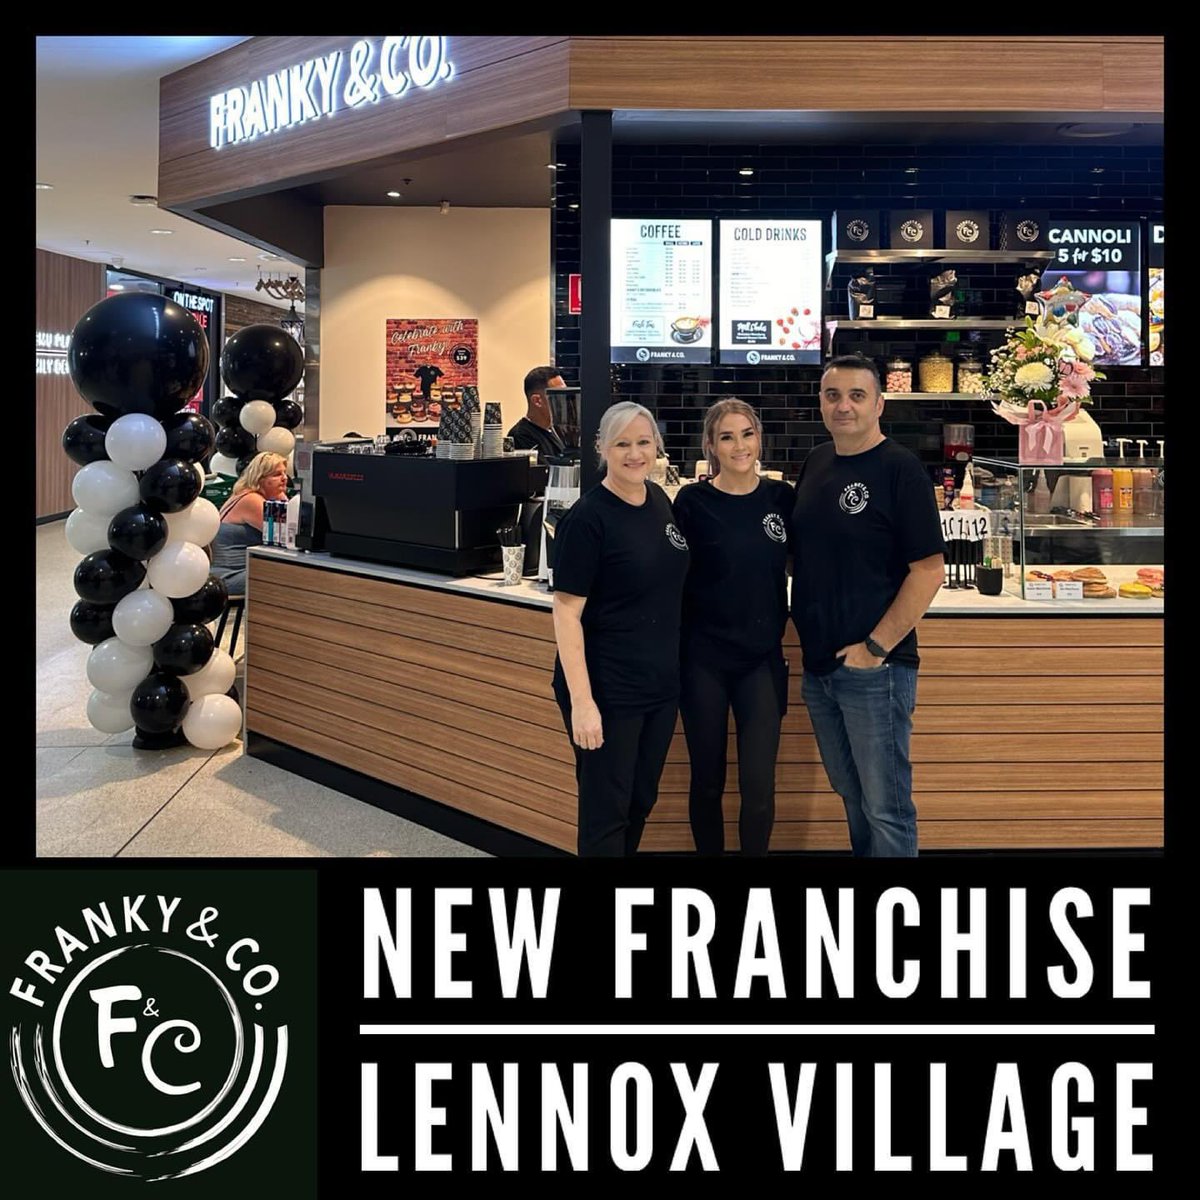 Welcome to the FRANKY & Co family - franchise #21